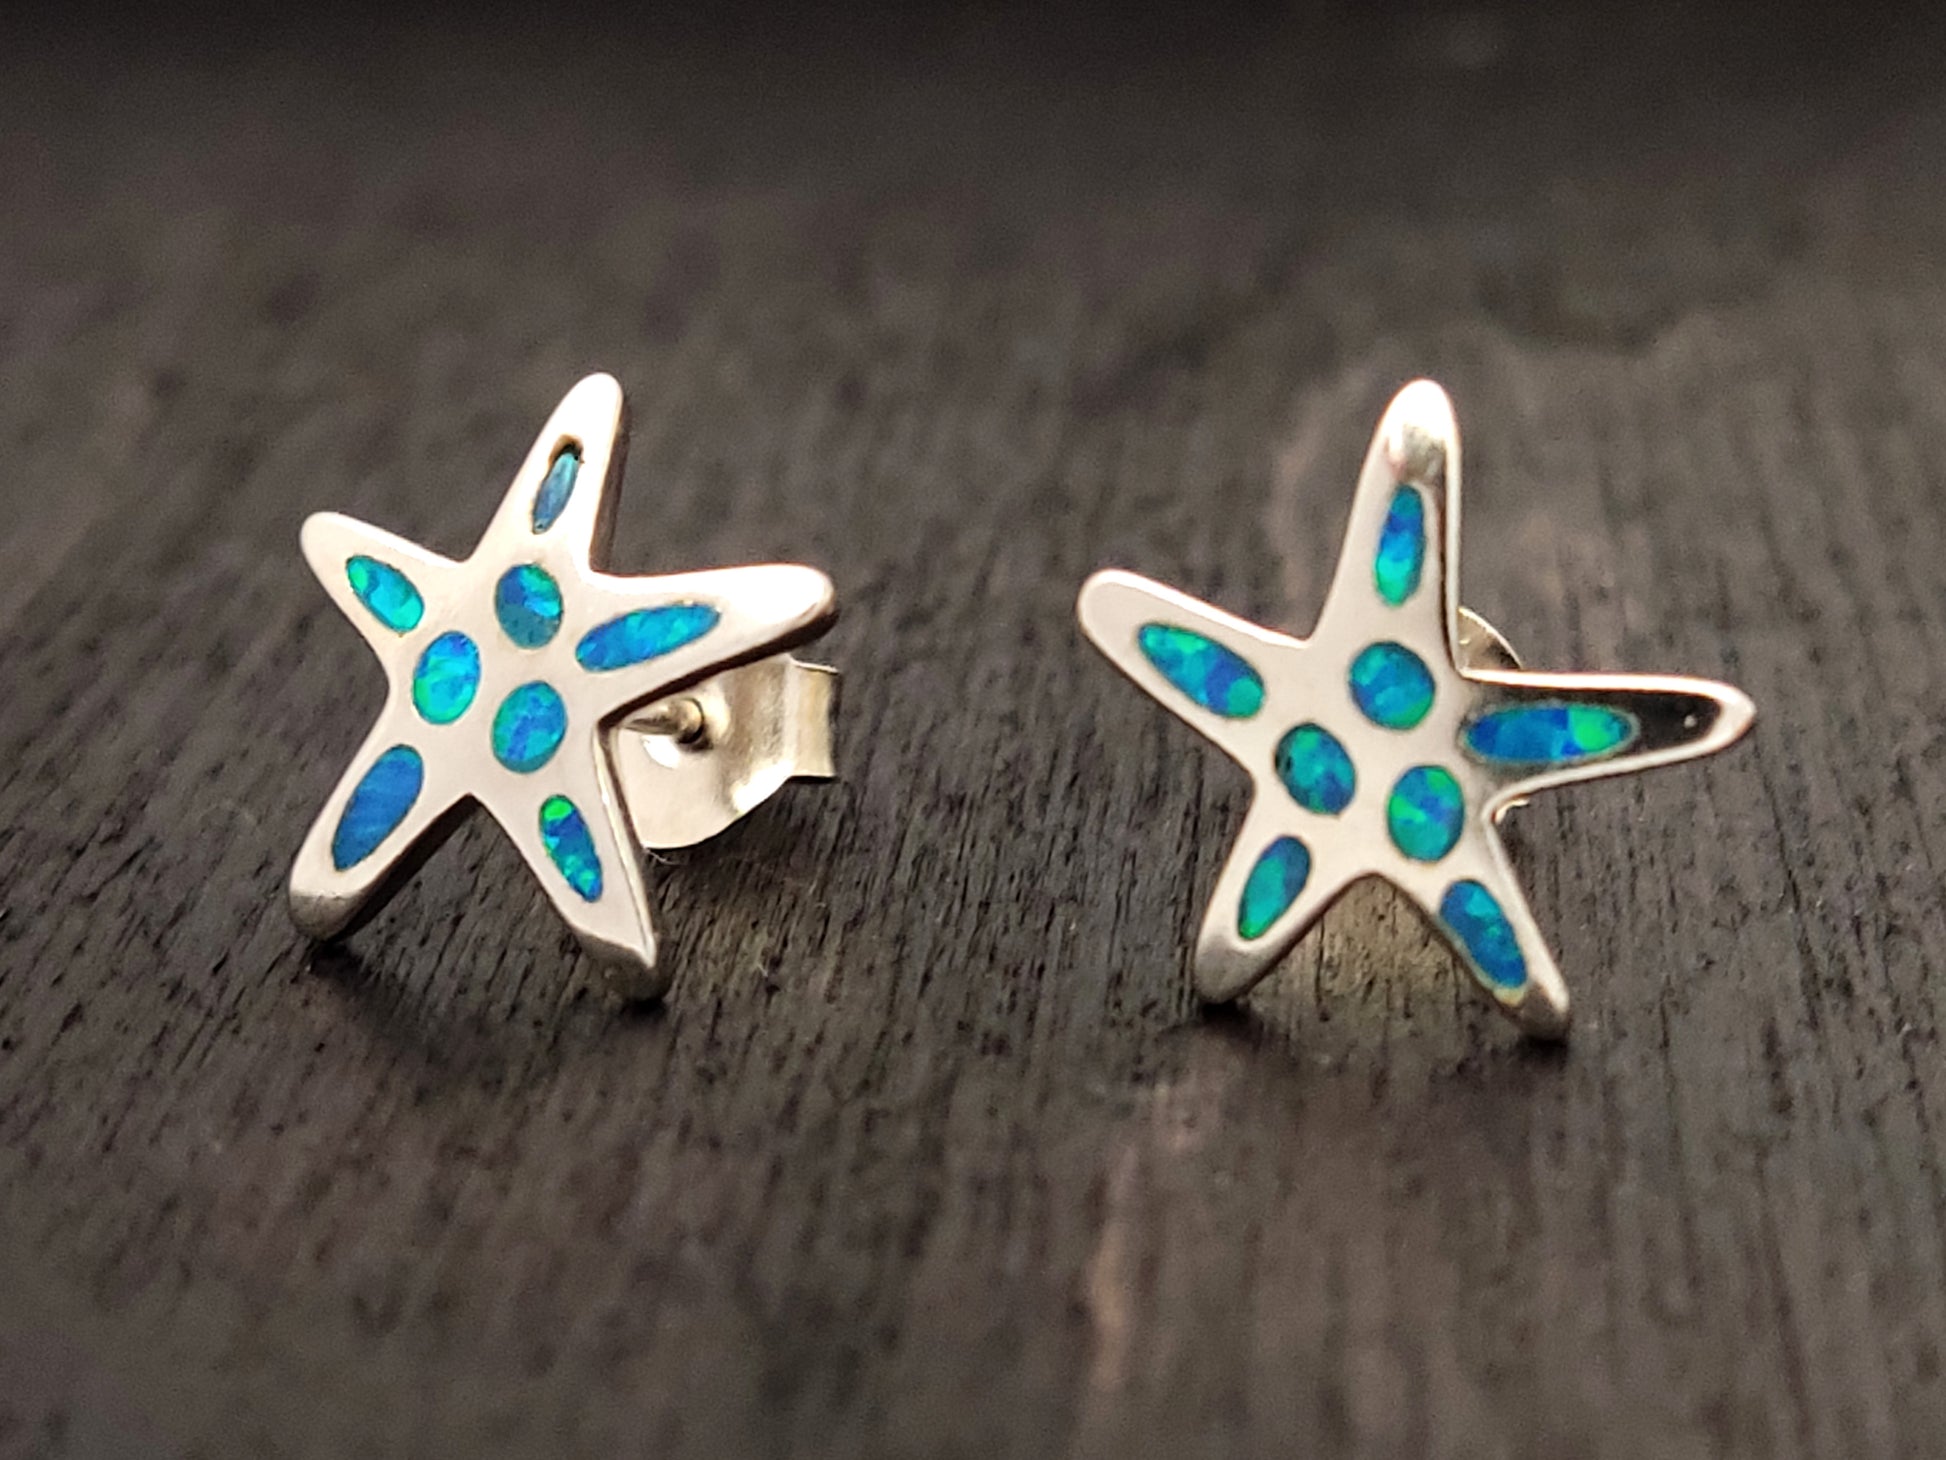 Starfish silver stud earrings with blue opal stones measuring 12mm on black background.